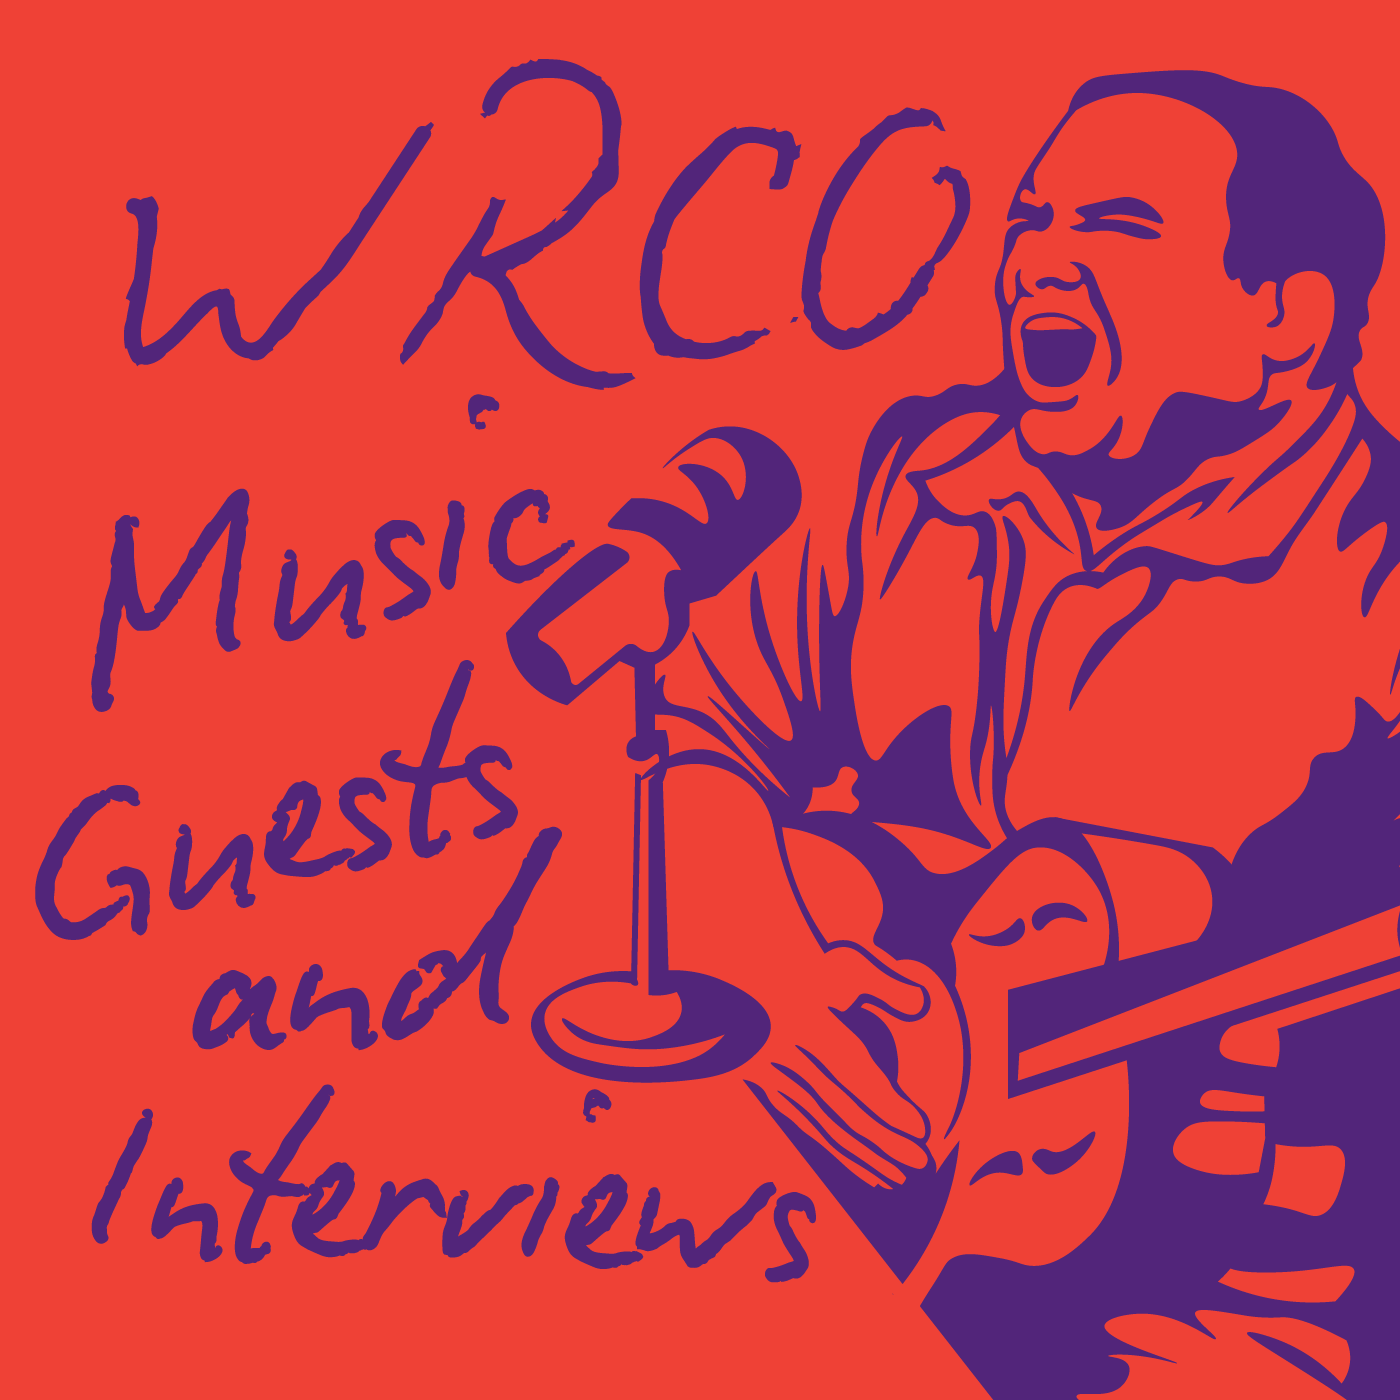 WRCO Music Guests & Interviews